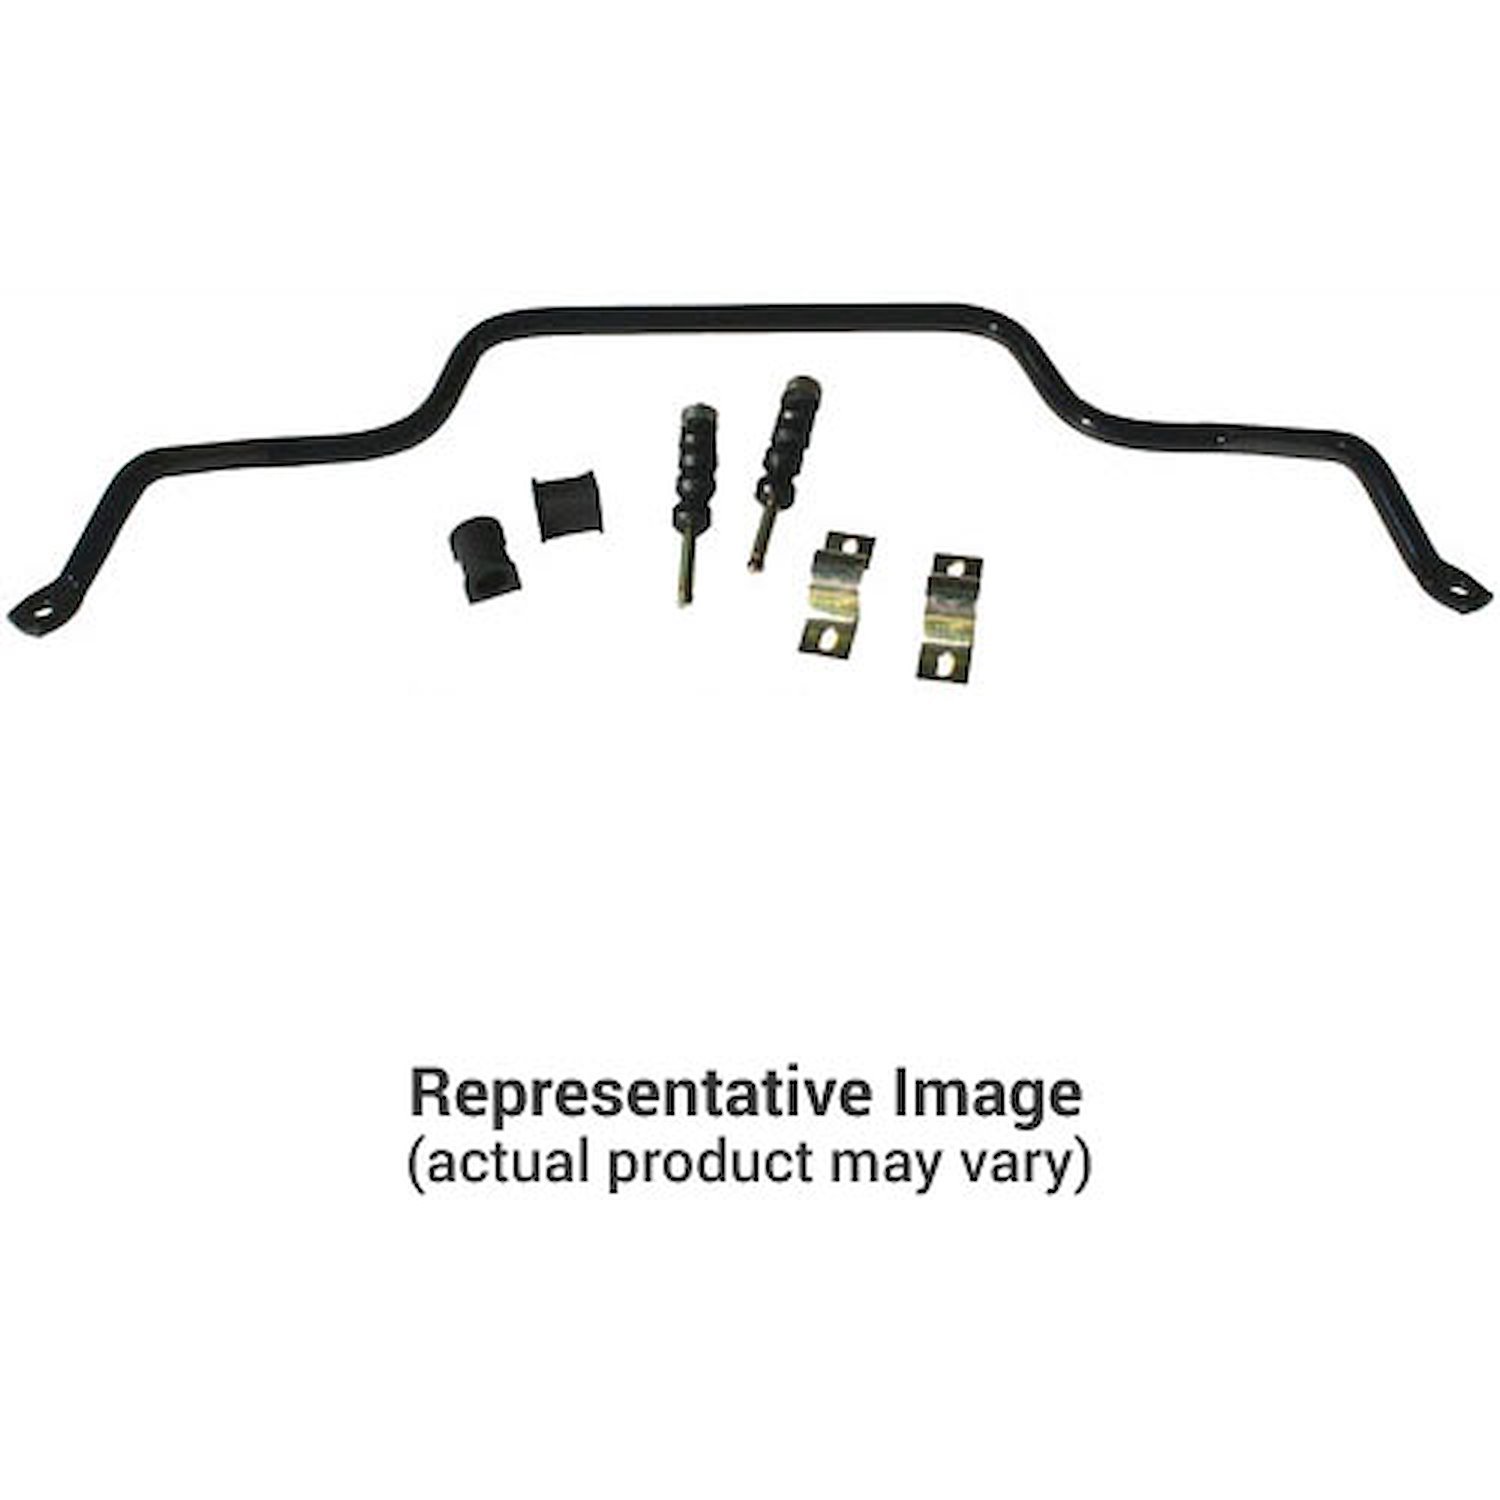 1 3/8" Front Sway Bar 1983-93 Ford Mustang